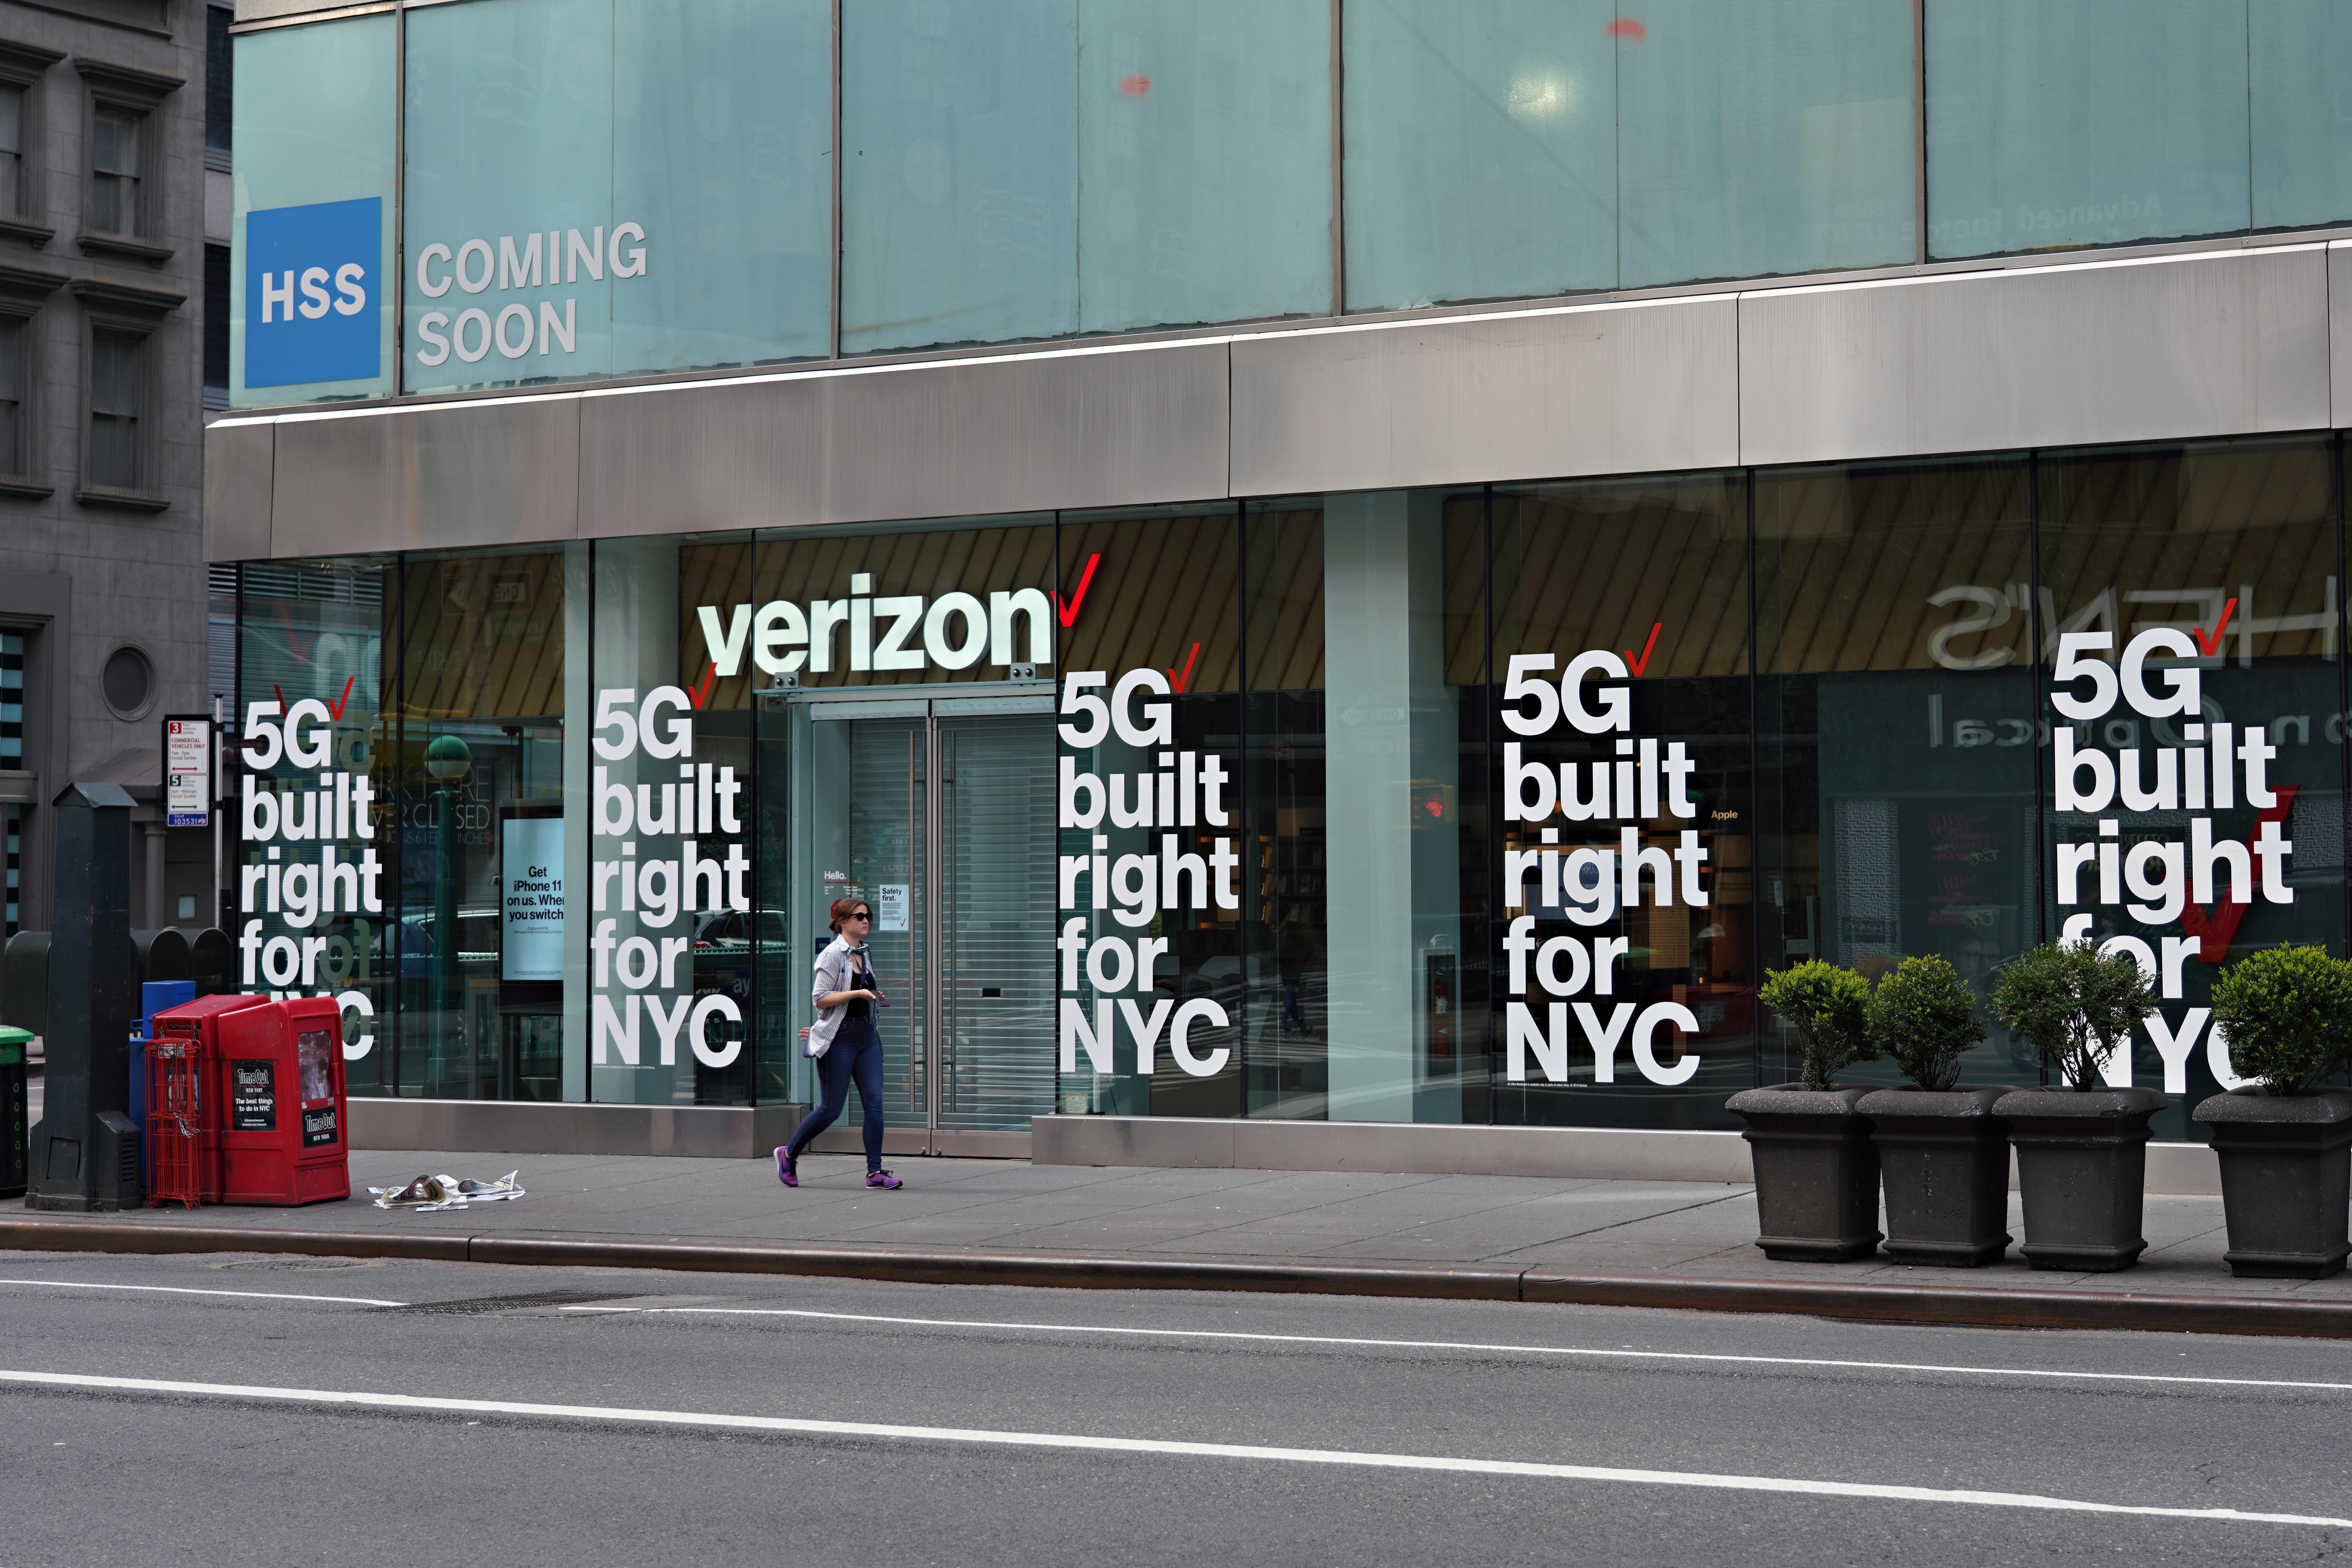 A person walks by a Verizon storefront with signs that say "5G built right for NYC."